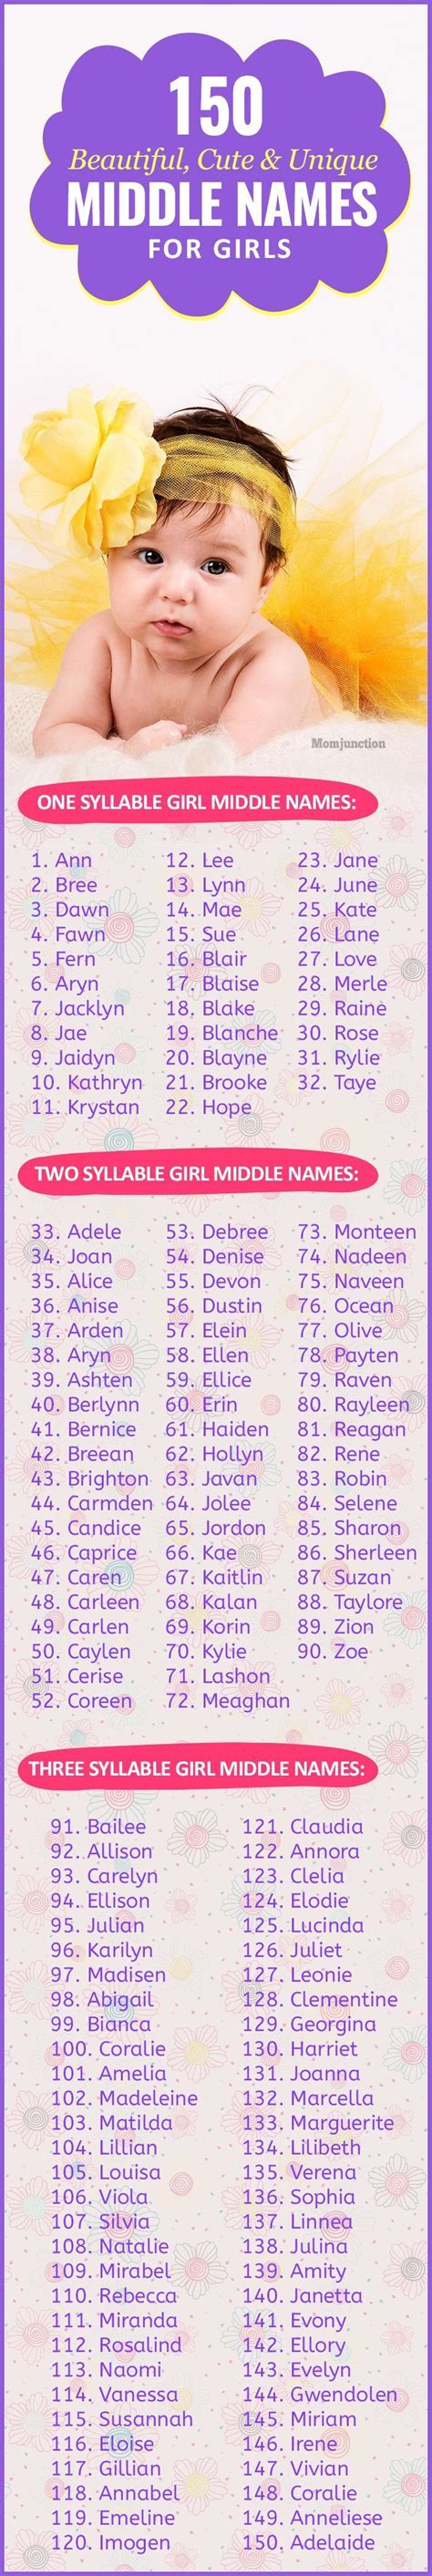 Unique And Beautiful Middle Names For Girls In